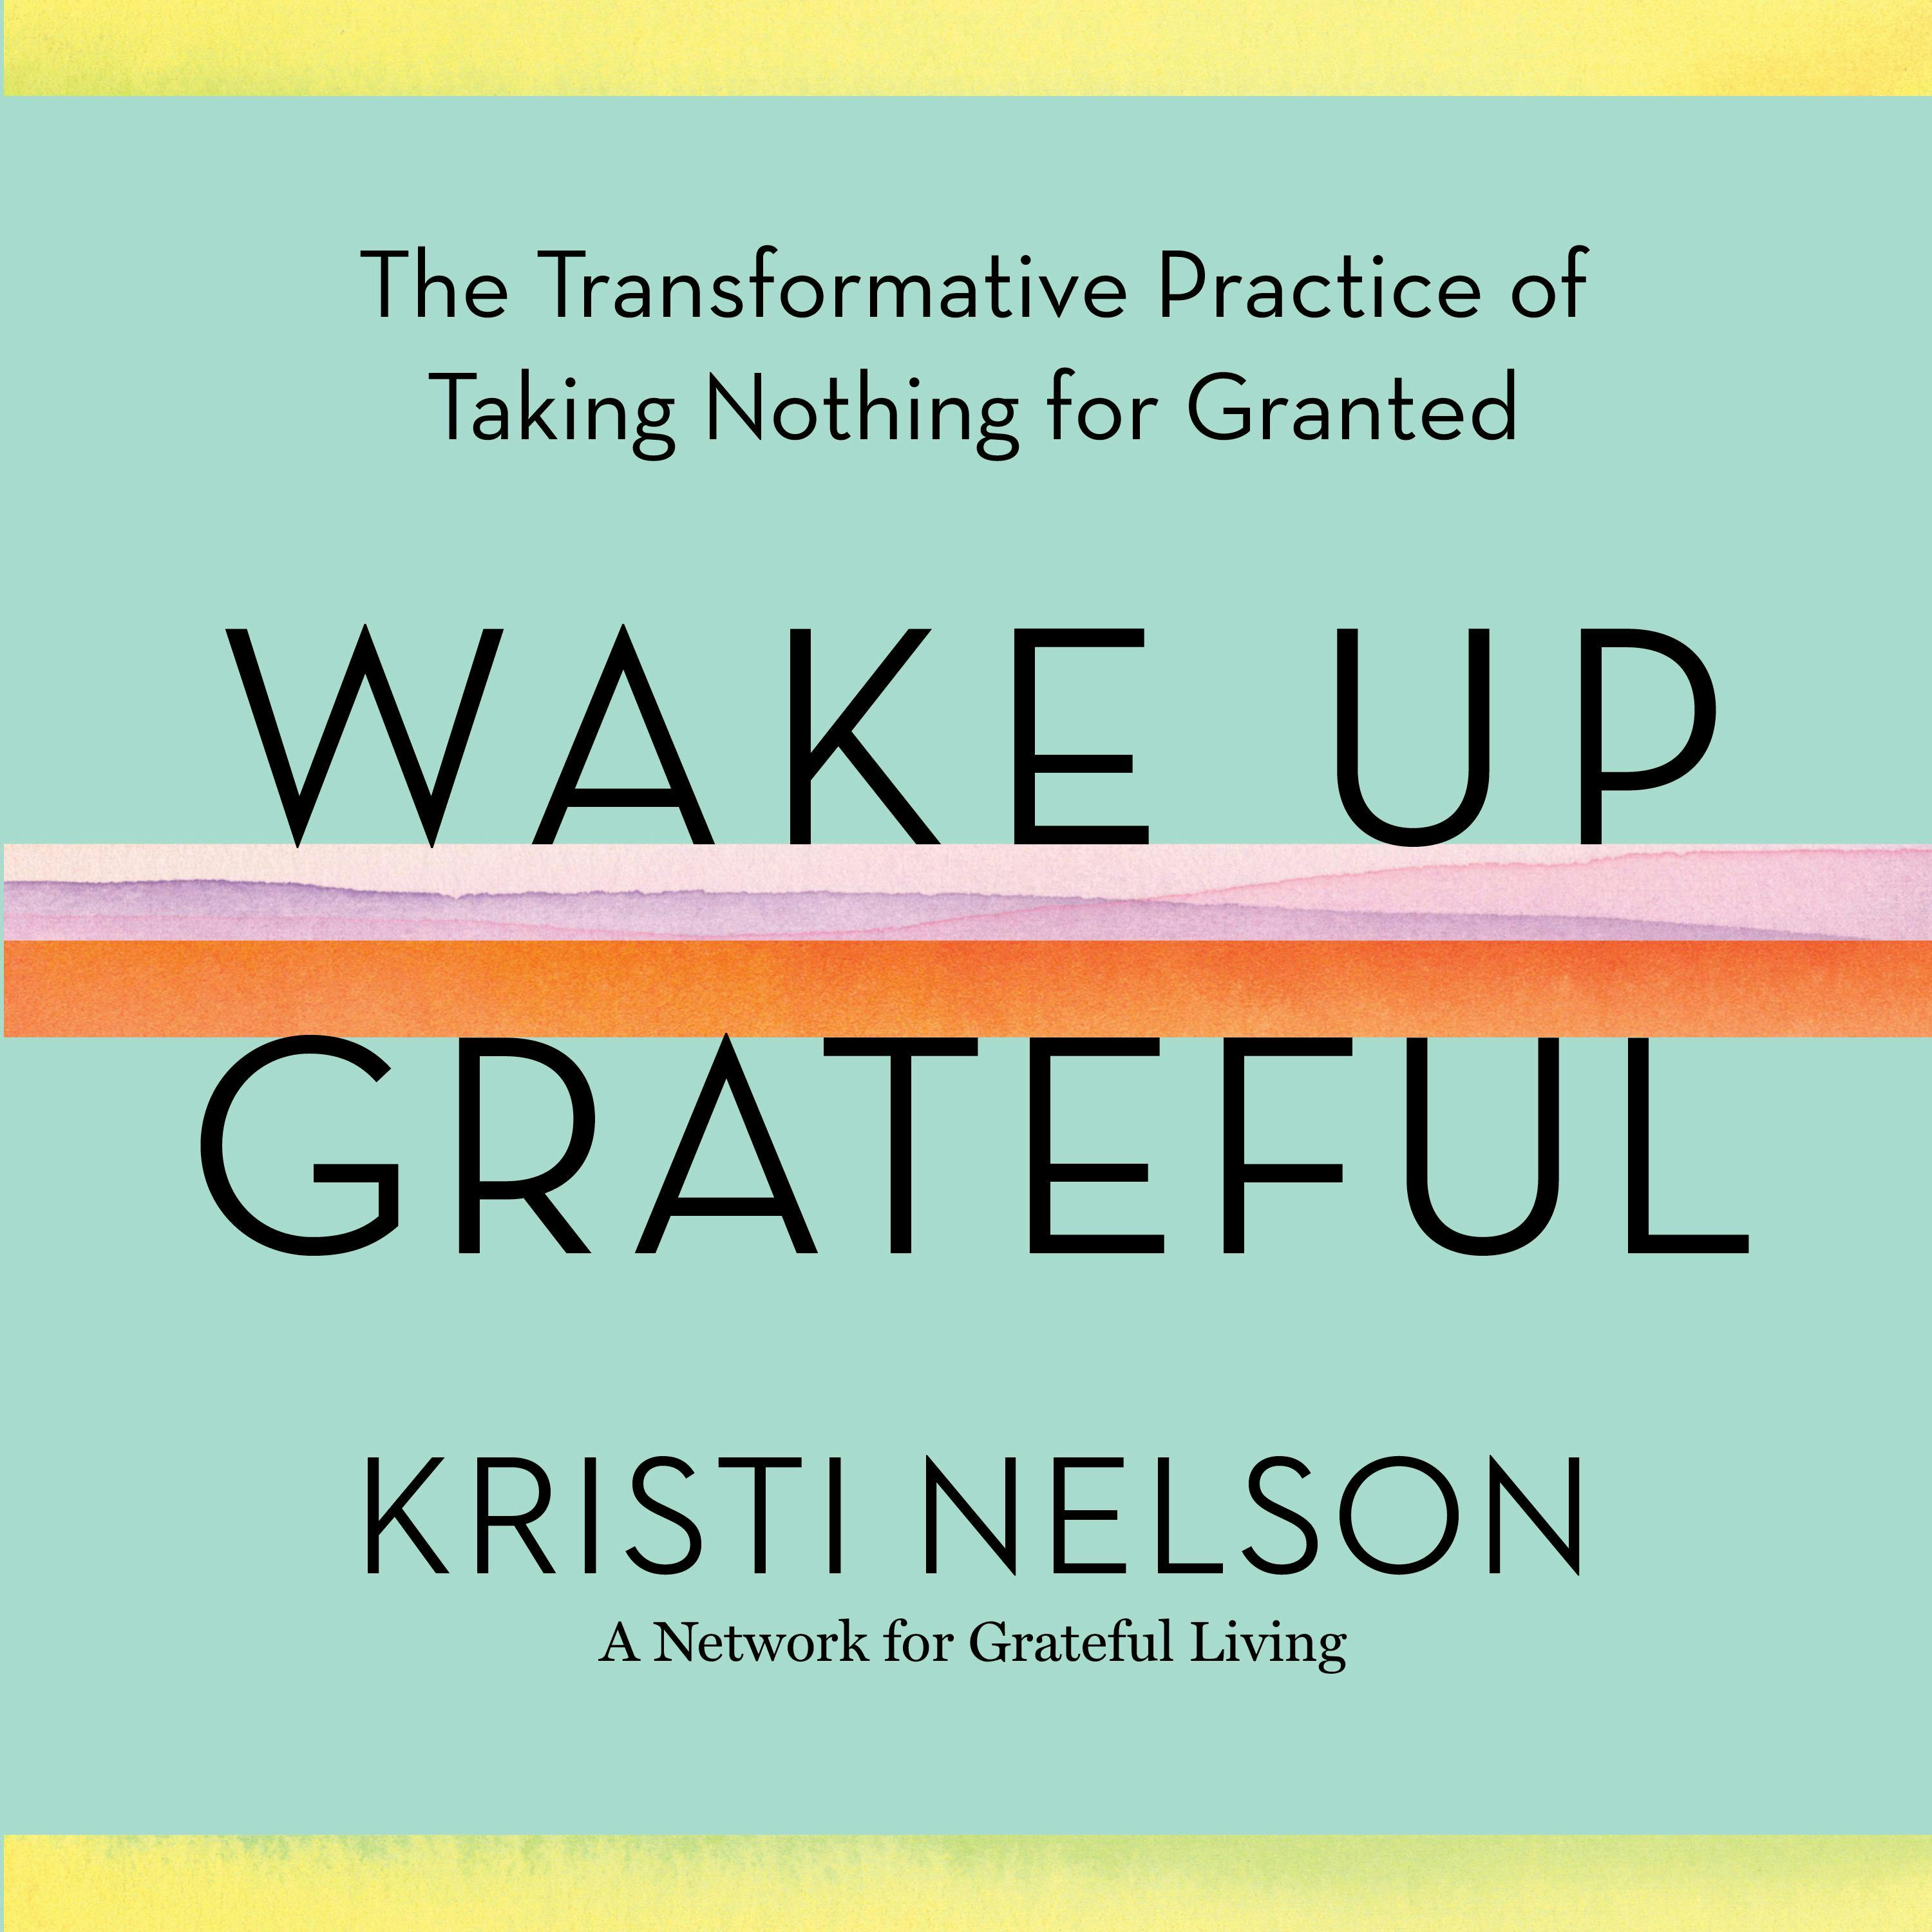 Wake Up Grateful: The Transformative Practice of Taking Nothing for Granted - Kristi Nelson, Brother David Steindl-Rast